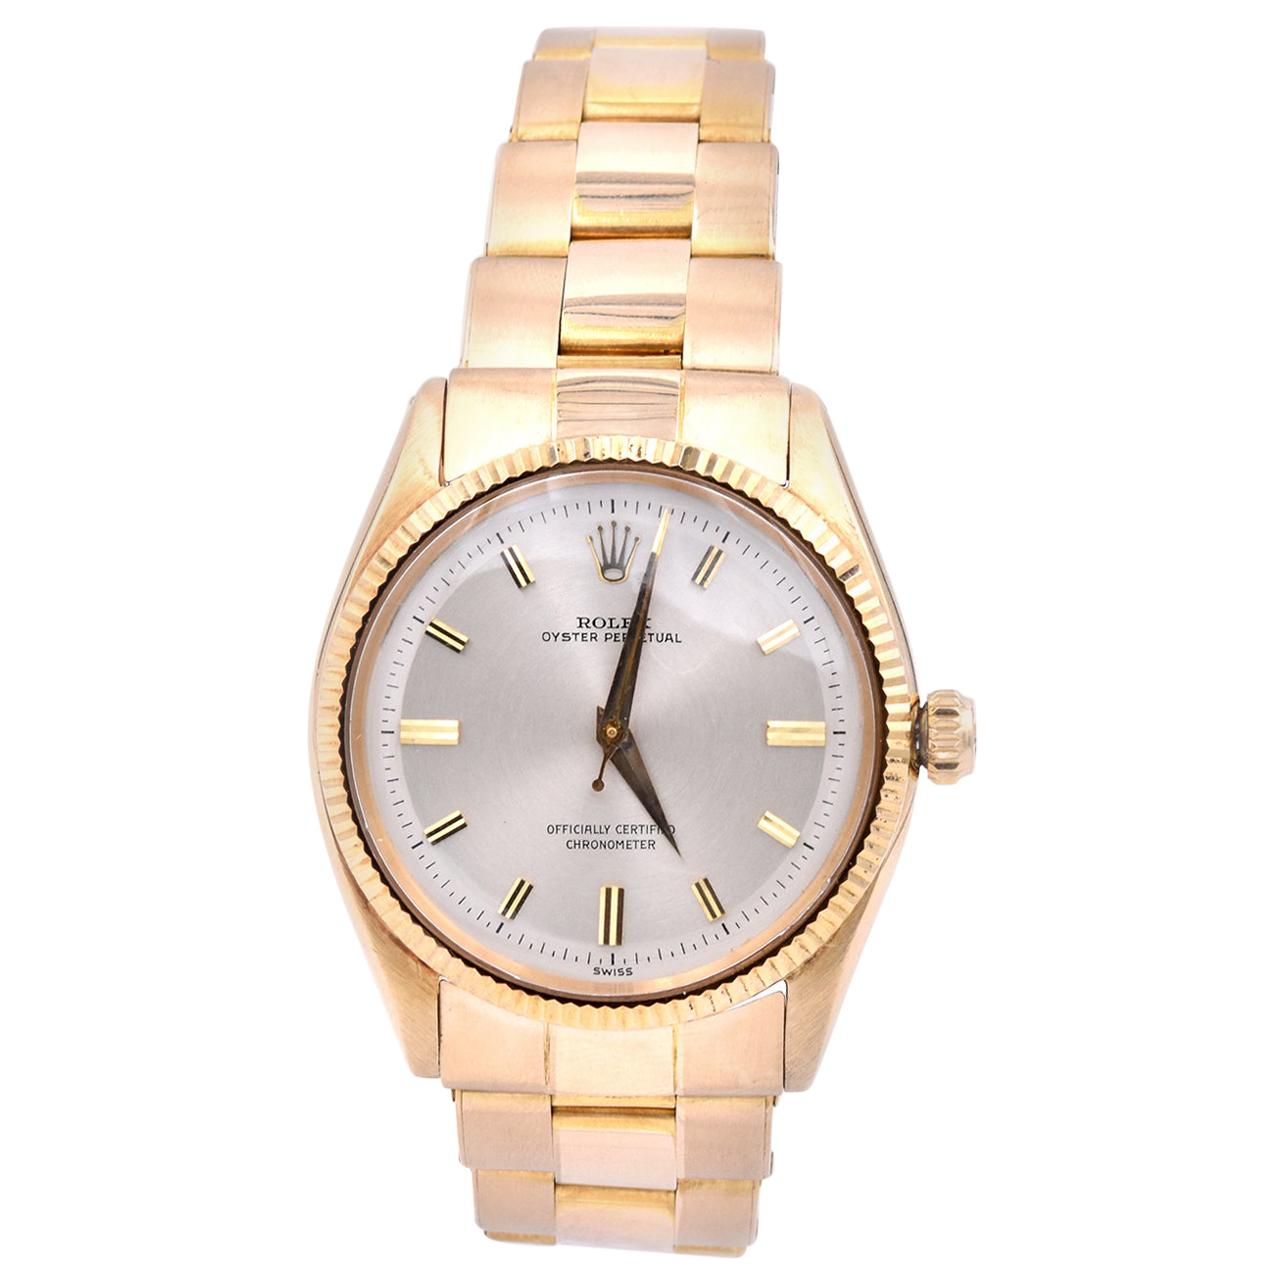 Rolex 18k Yellow Gold No Date Oyster Perpetual Watch Ref. 6567